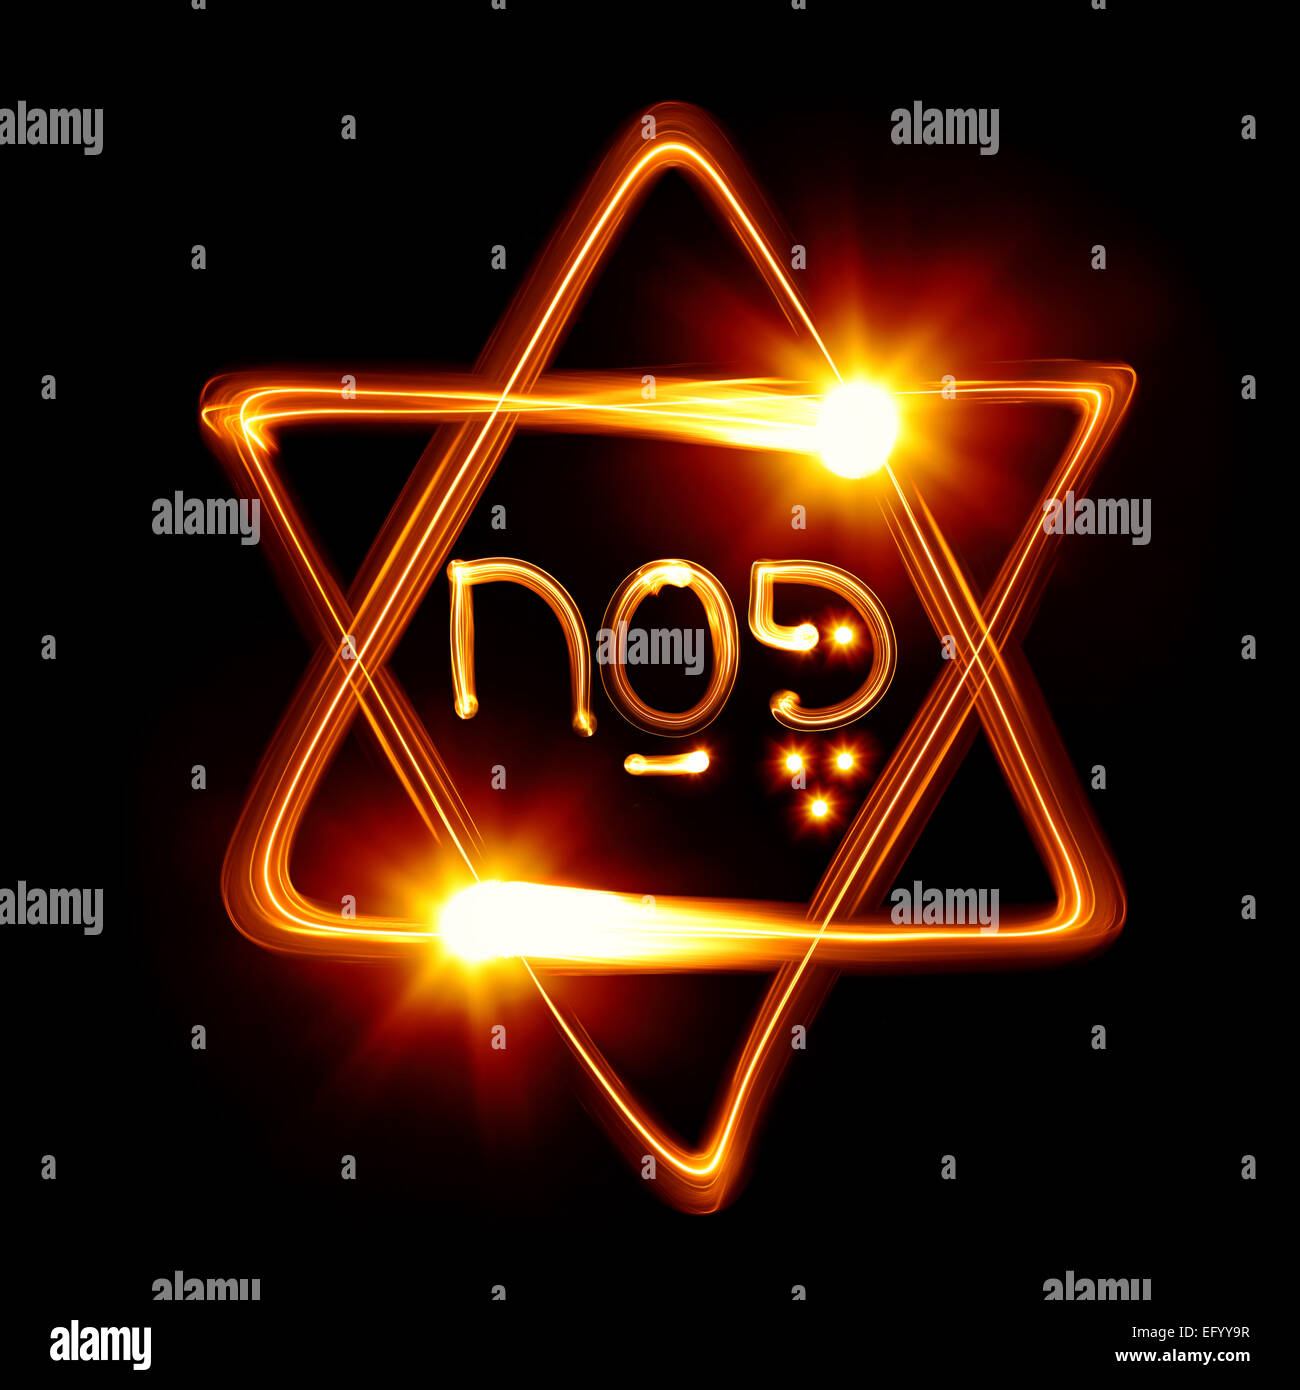 Passover - Star of David created by light Stock Photo